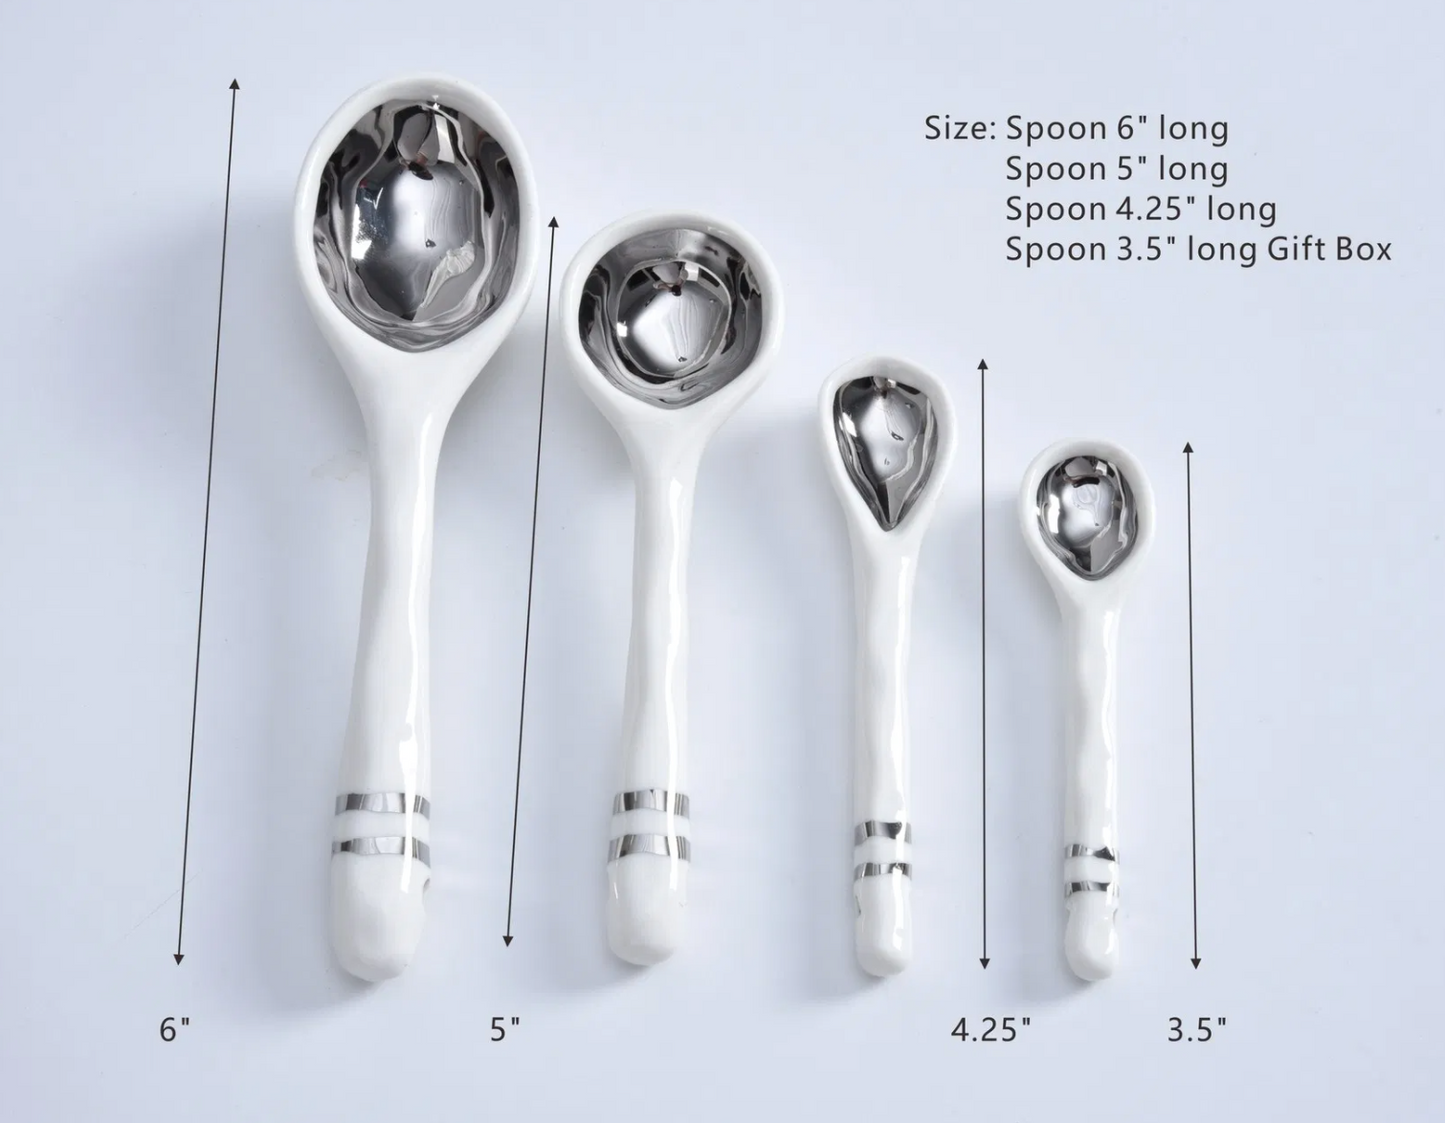 SILVER AND WHITE PORCELAIN SNACK AND SPICE SPOONS (SOLD AS SET OF 4)